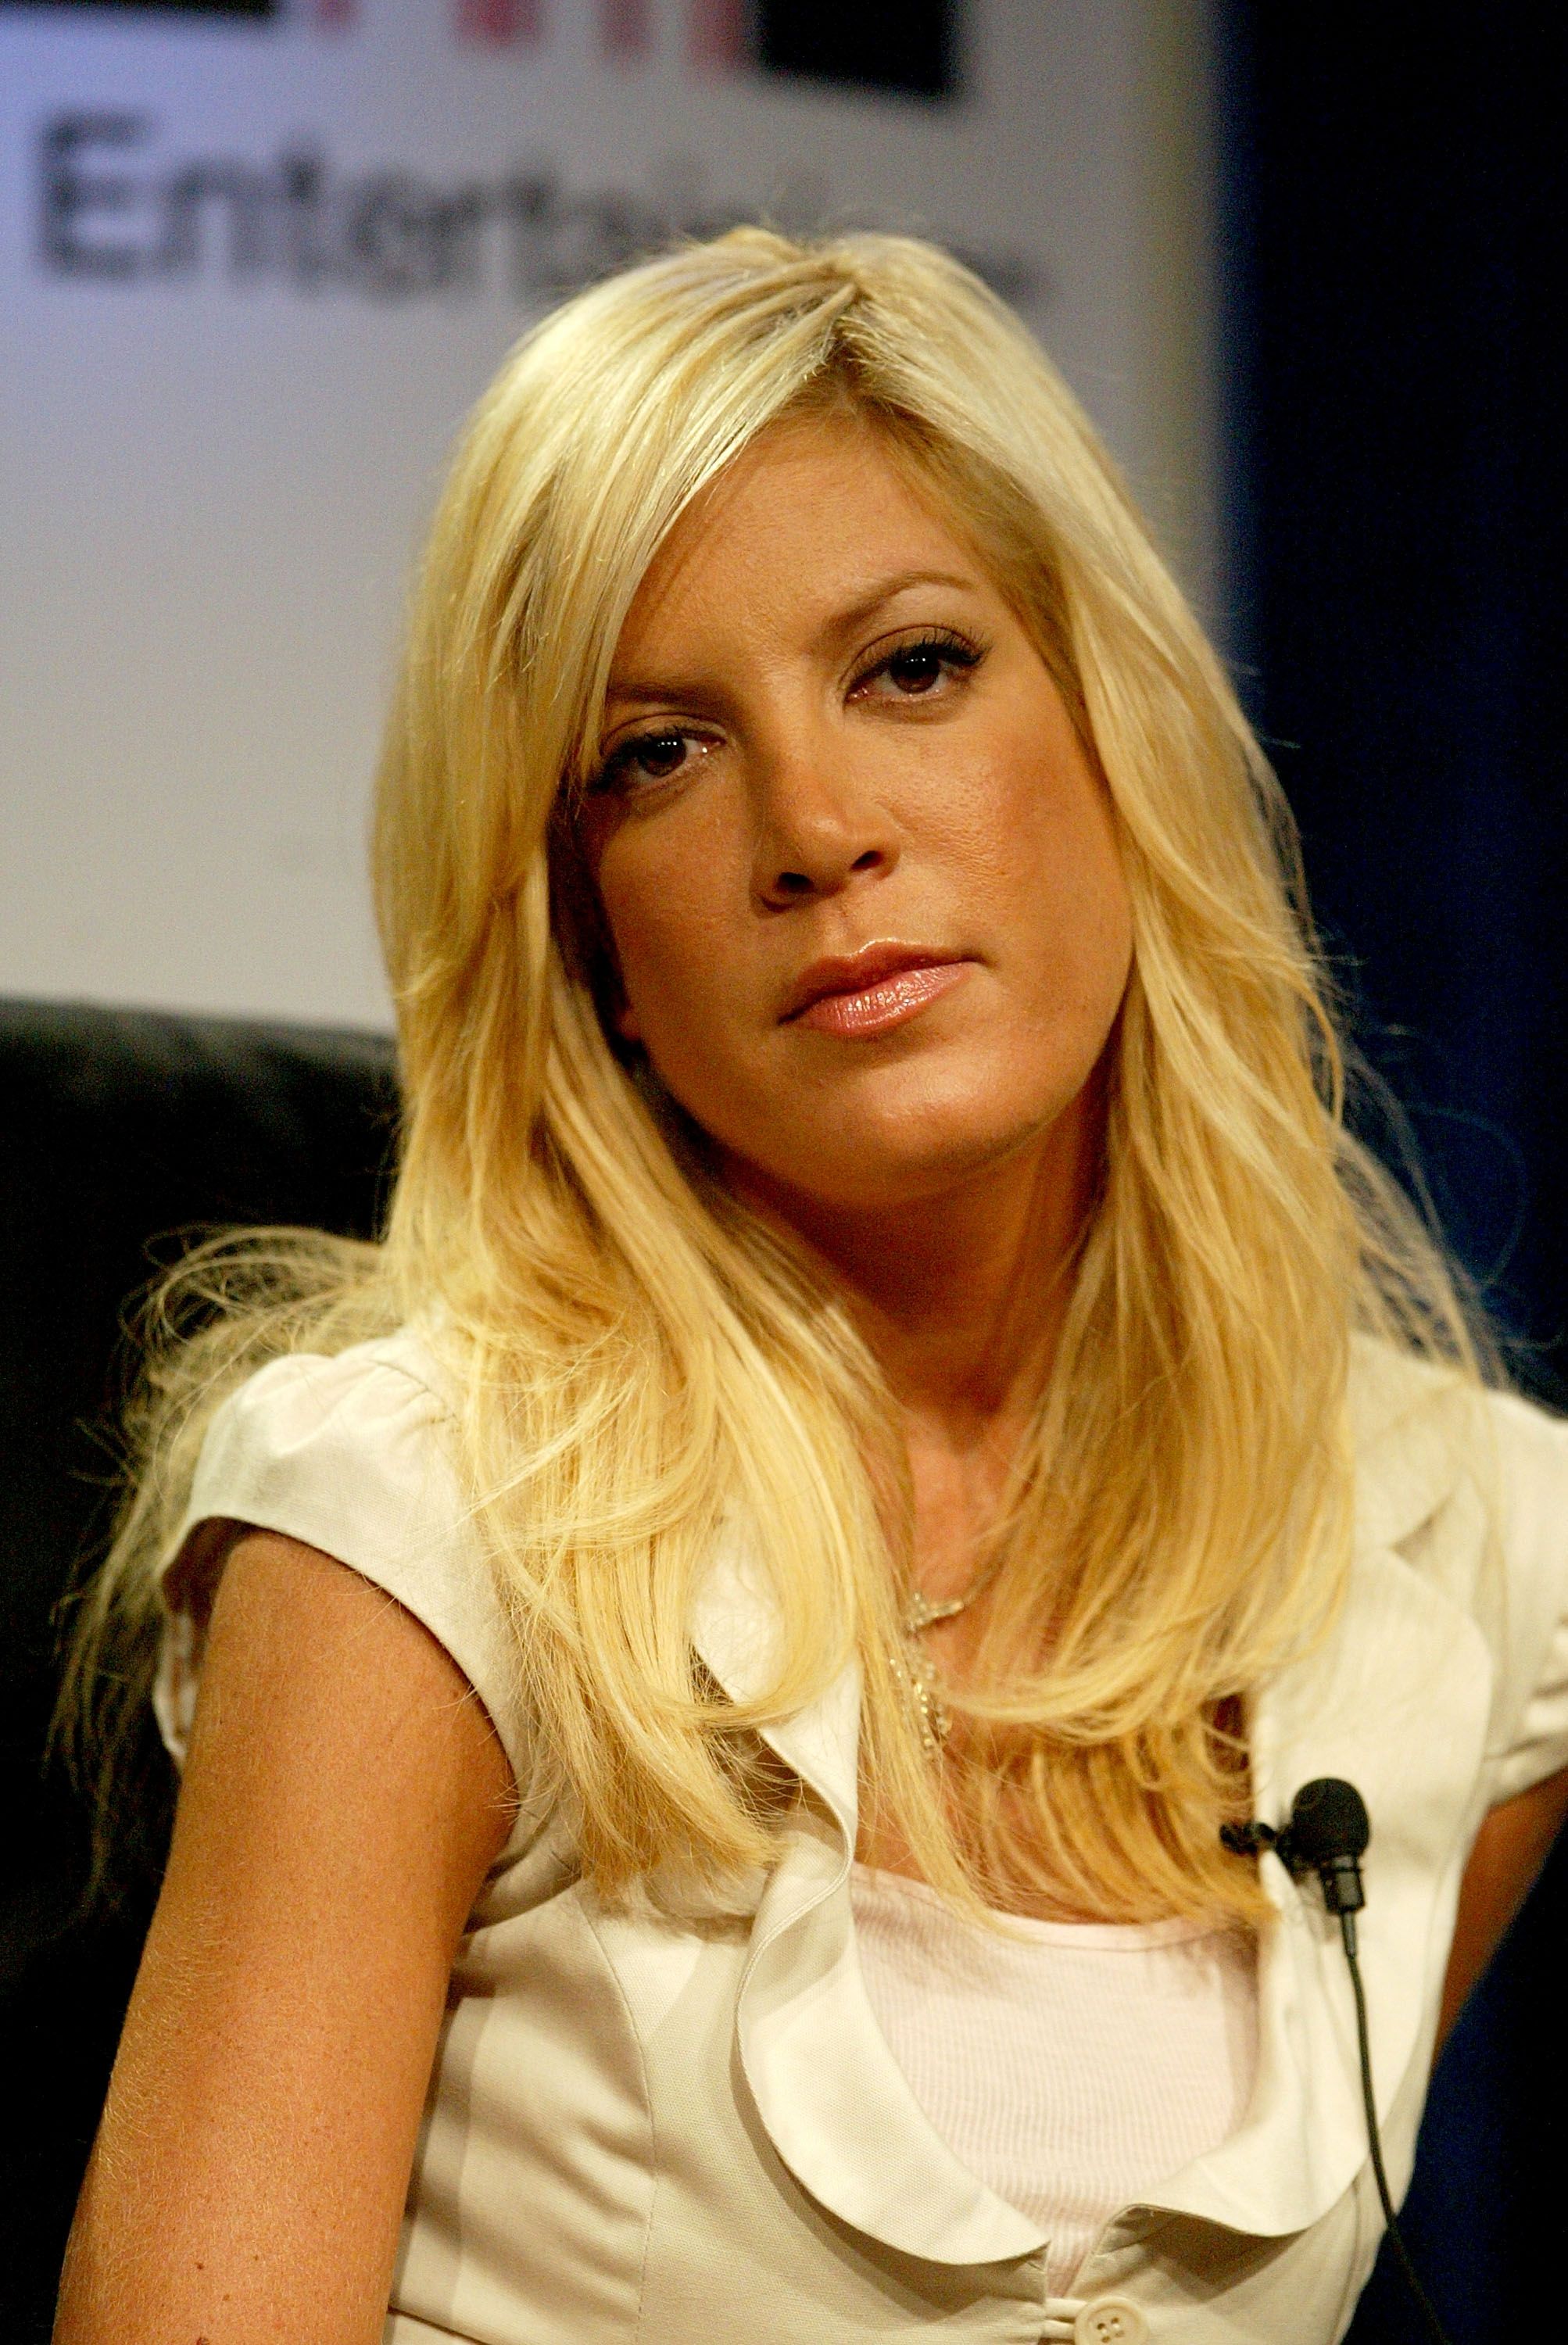 Tori Spelling attending Court TV's "Hollywood Stalkers" on July 14, 2005 in Beverly Hills. | Photo: Getty Images